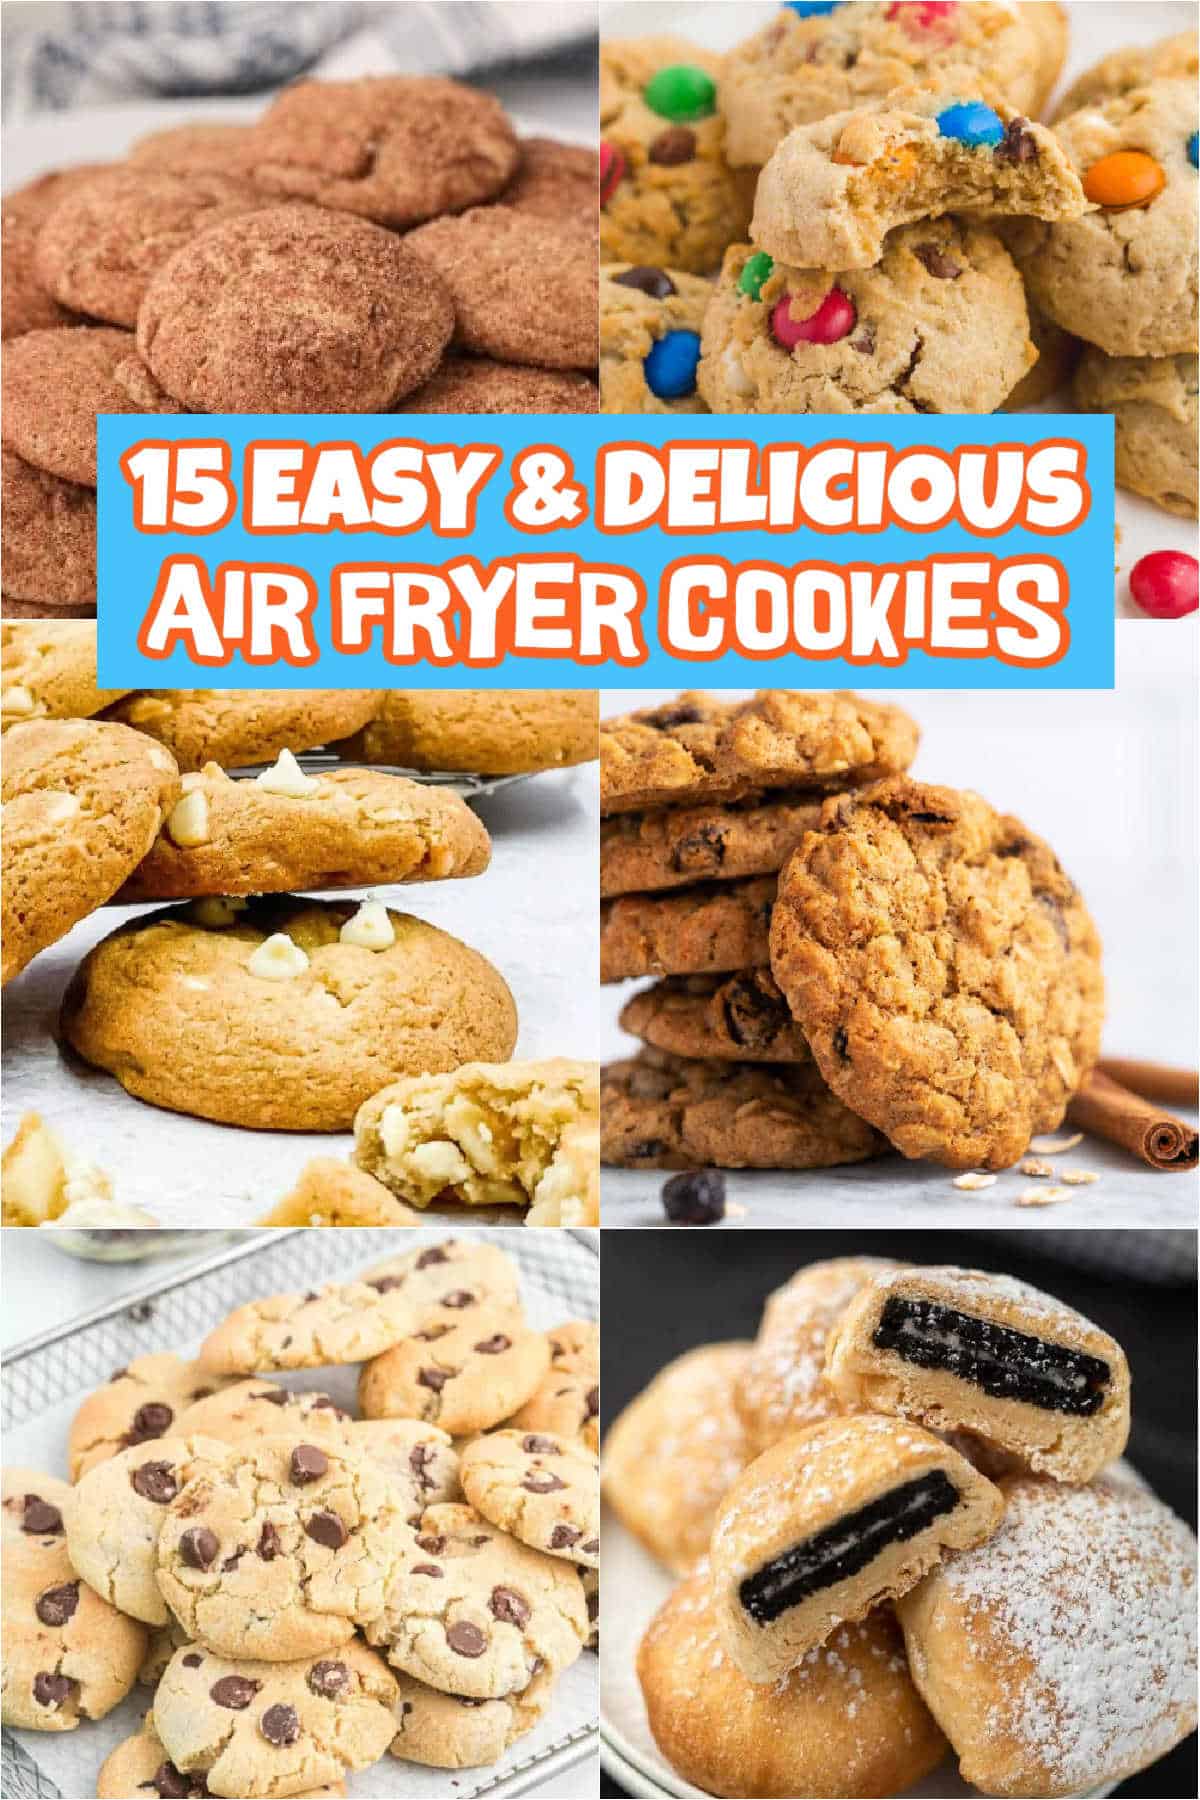 Image of snickerdoodle cookie, monster cookie, white chocolate macadamia cookies, oatmeal cookies, chocolate chips cookies, fried oreos cookies